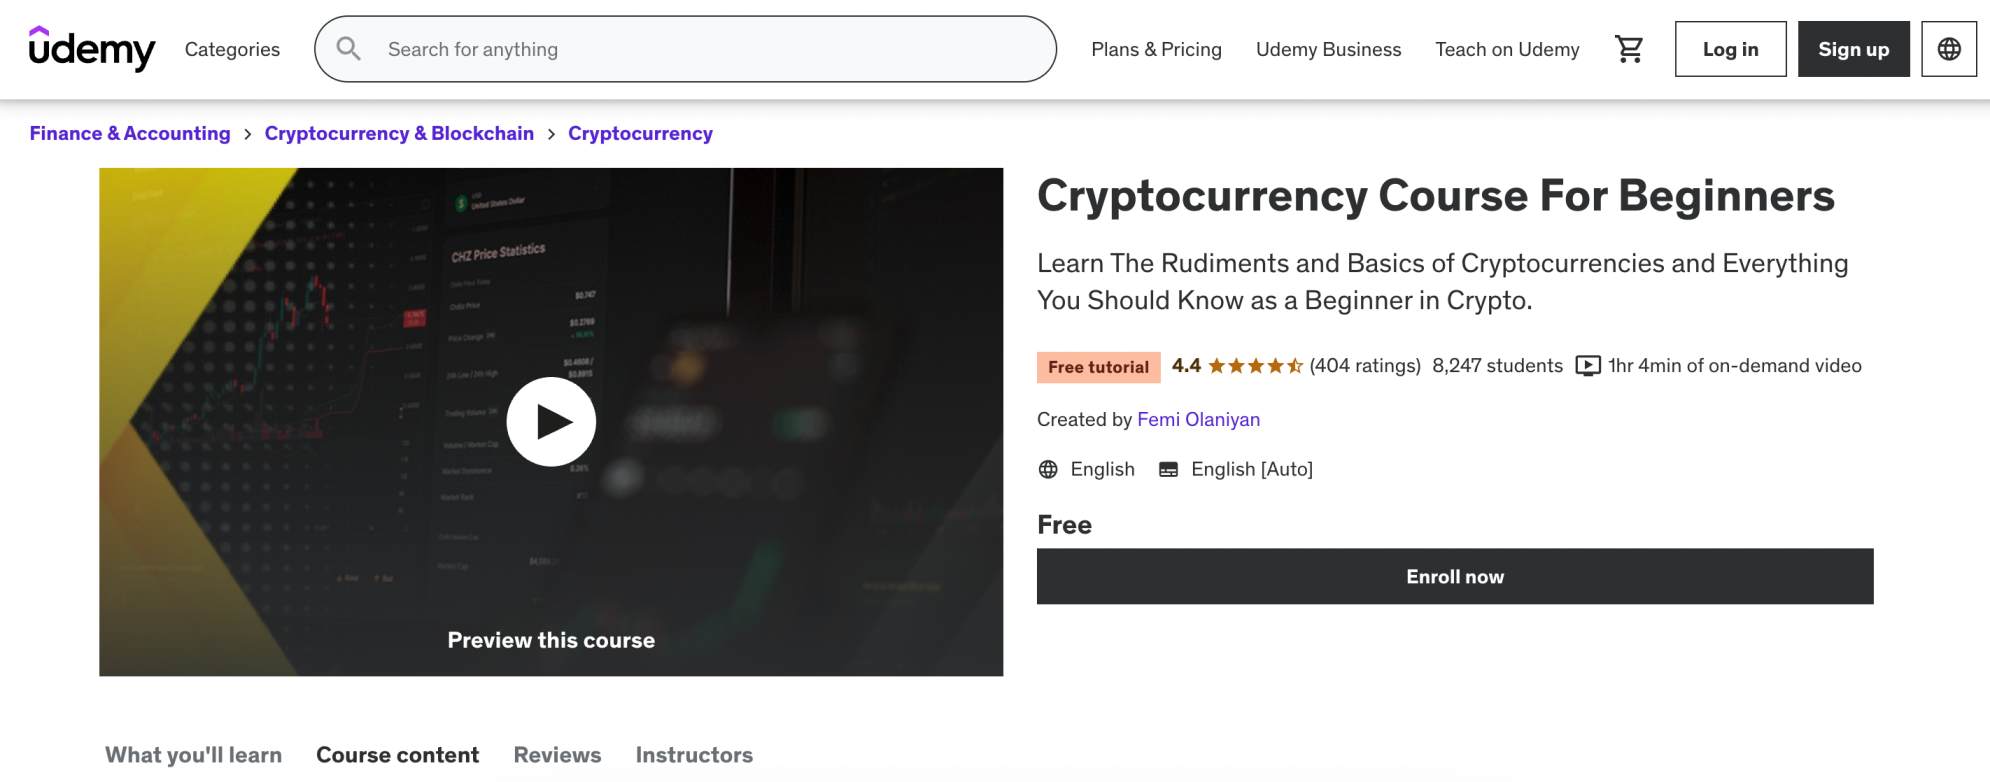 Cryptocurrency Course For Beginners (Udemy)